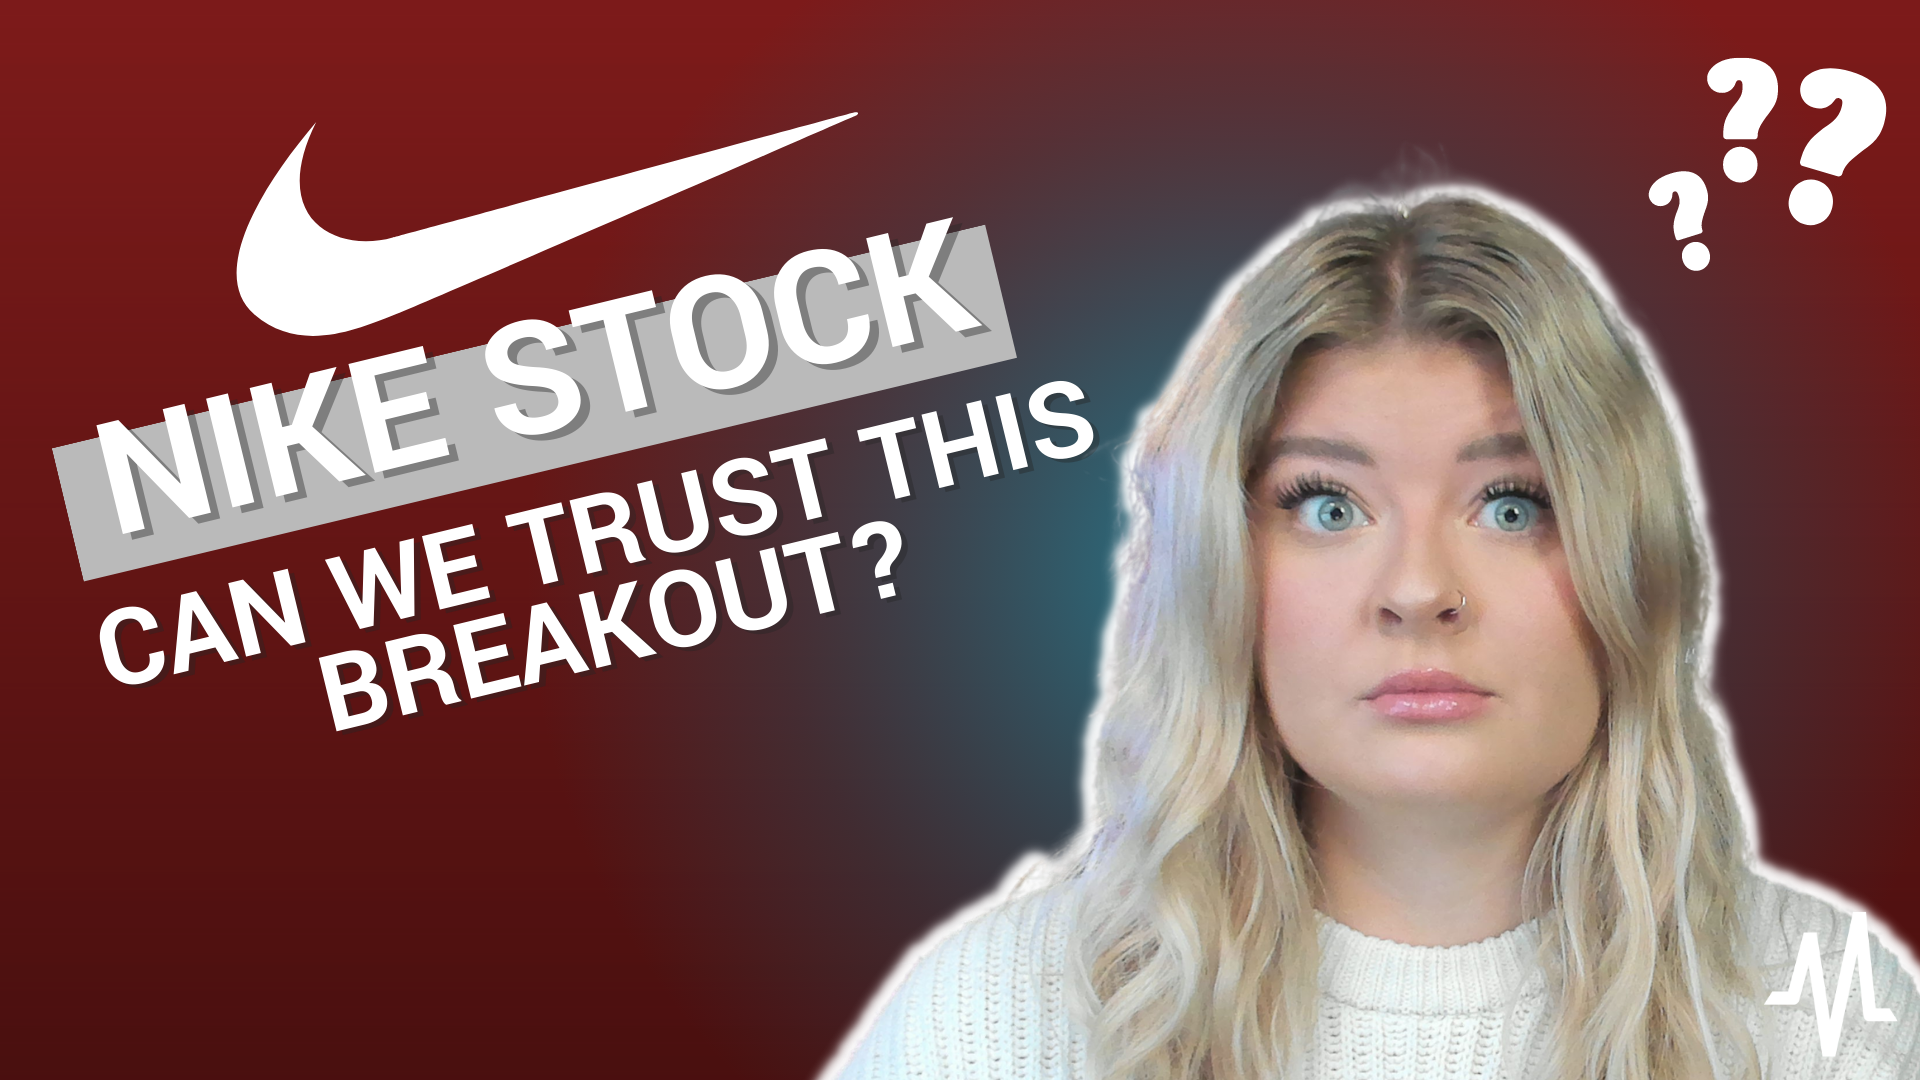 Nike Stock: Can We Trust This Breakout?